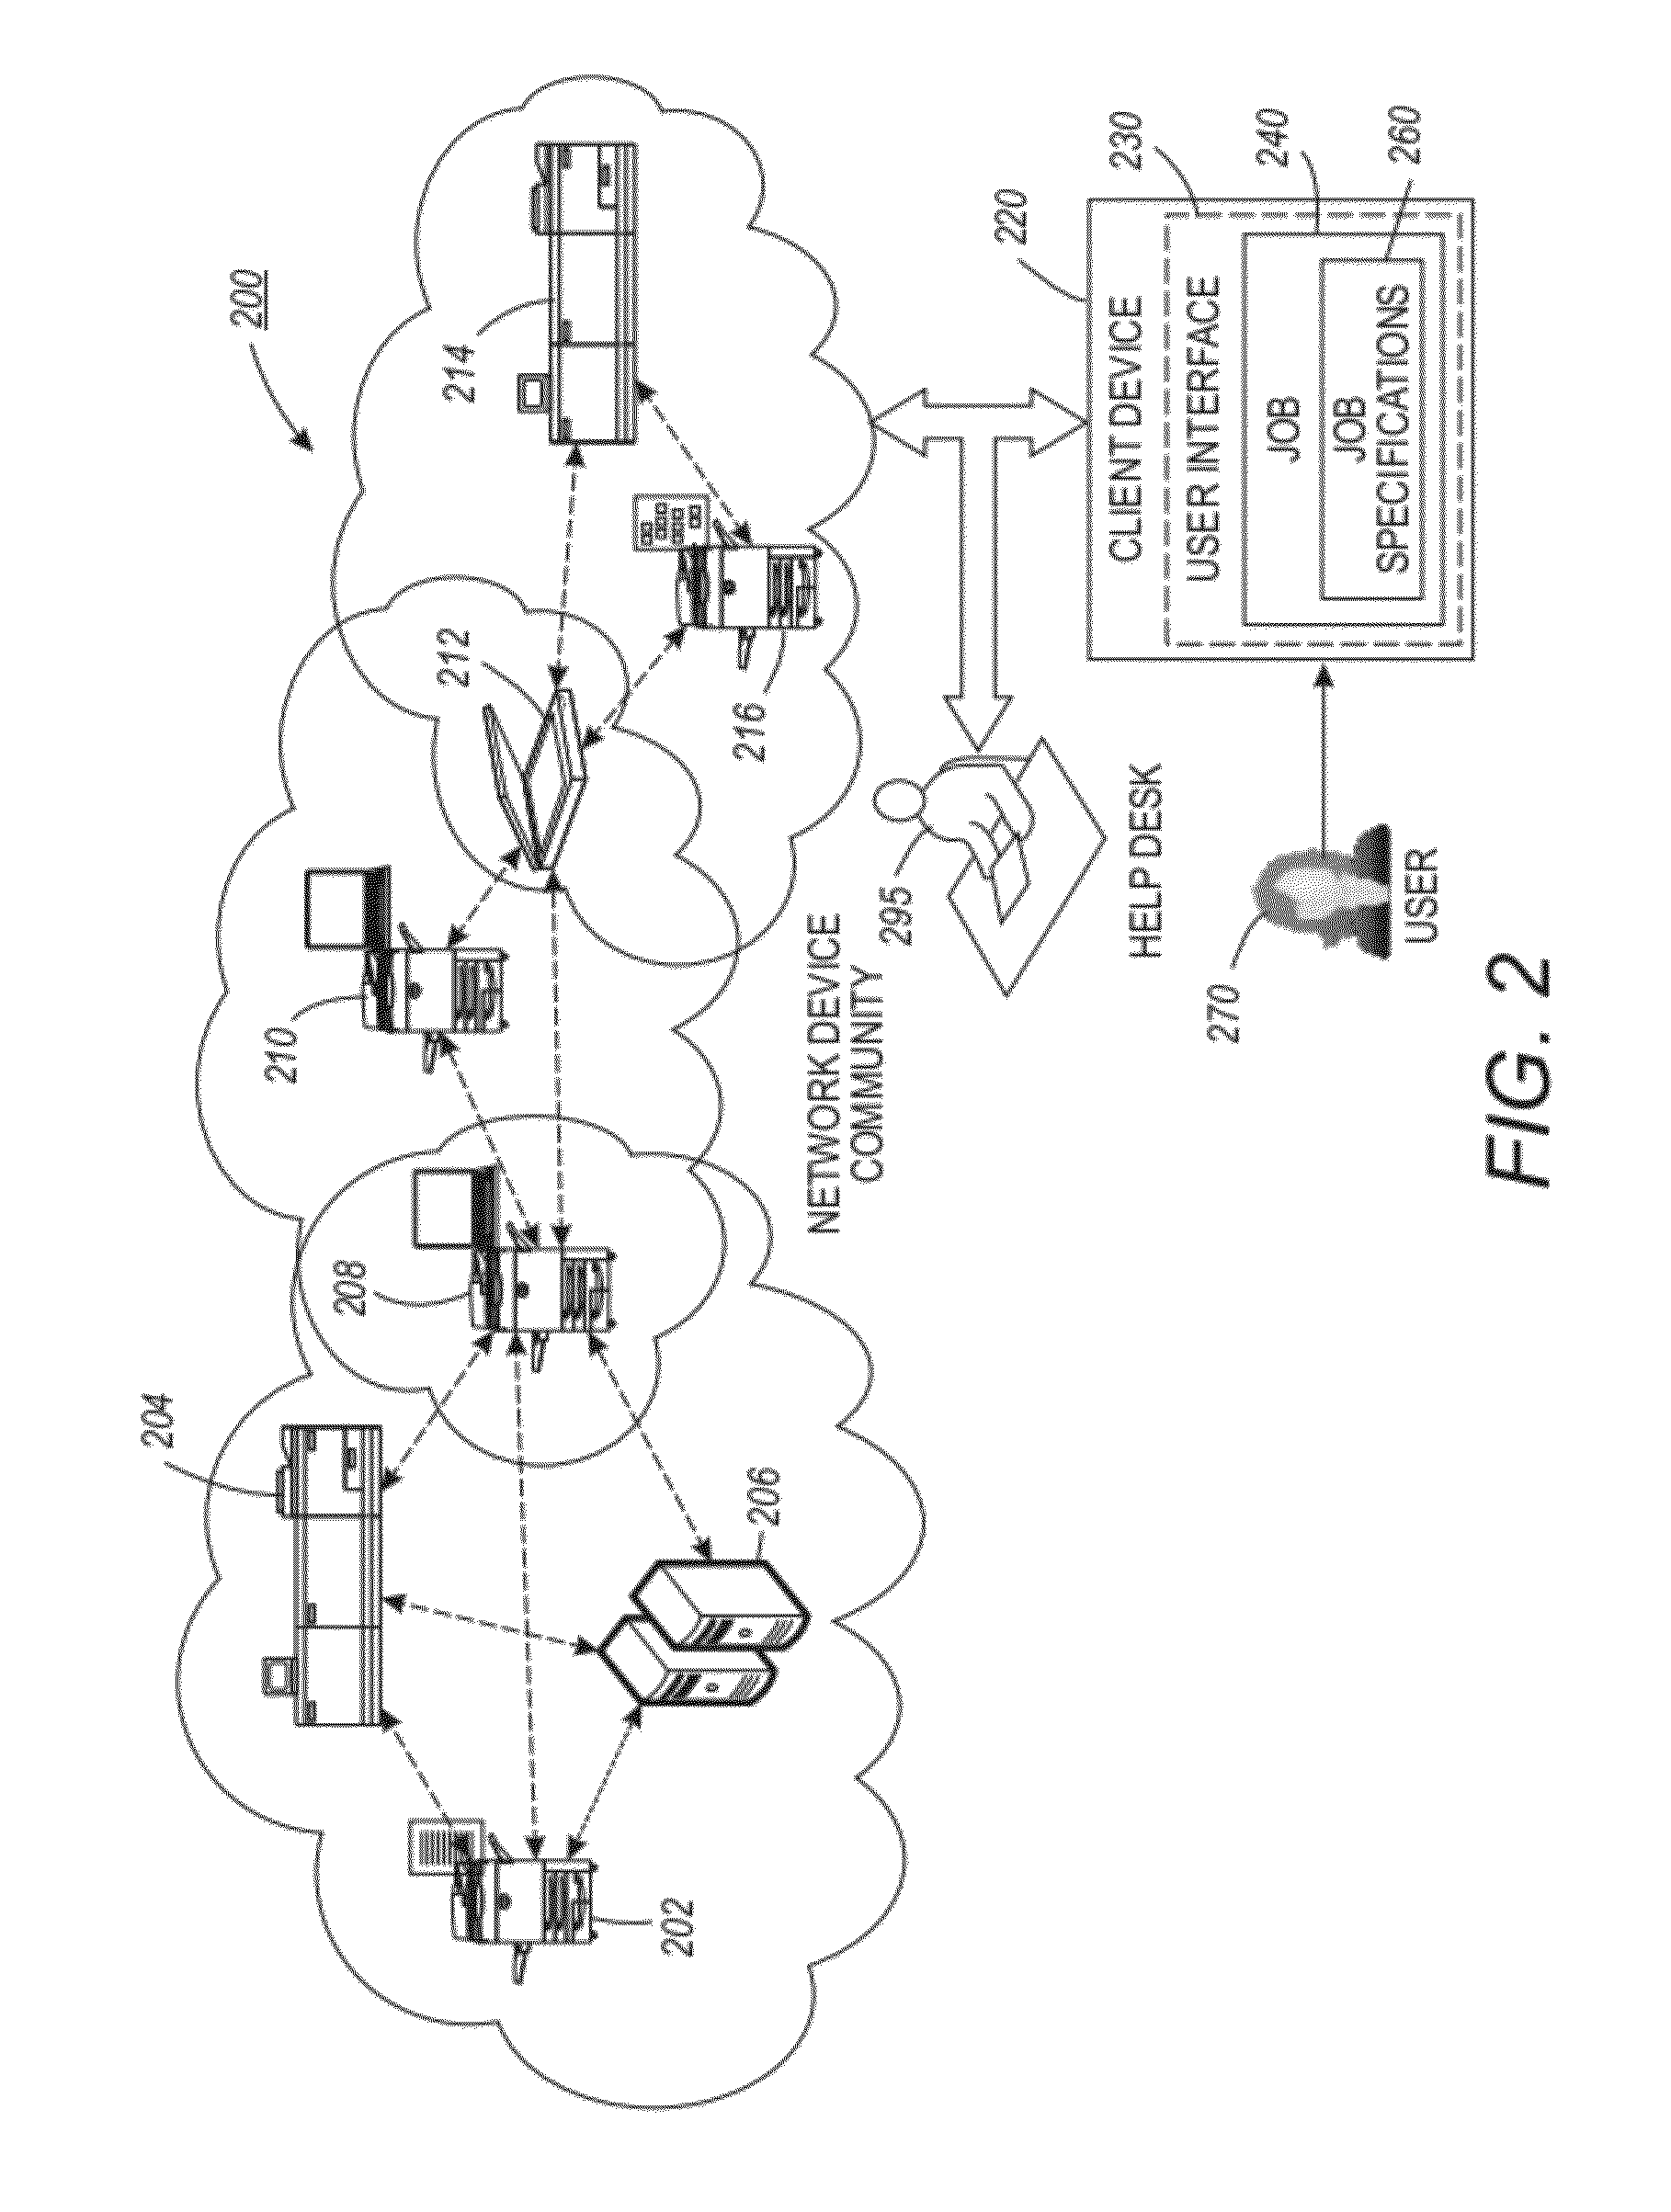 Method and system for automatically redirecting jobs in a device community